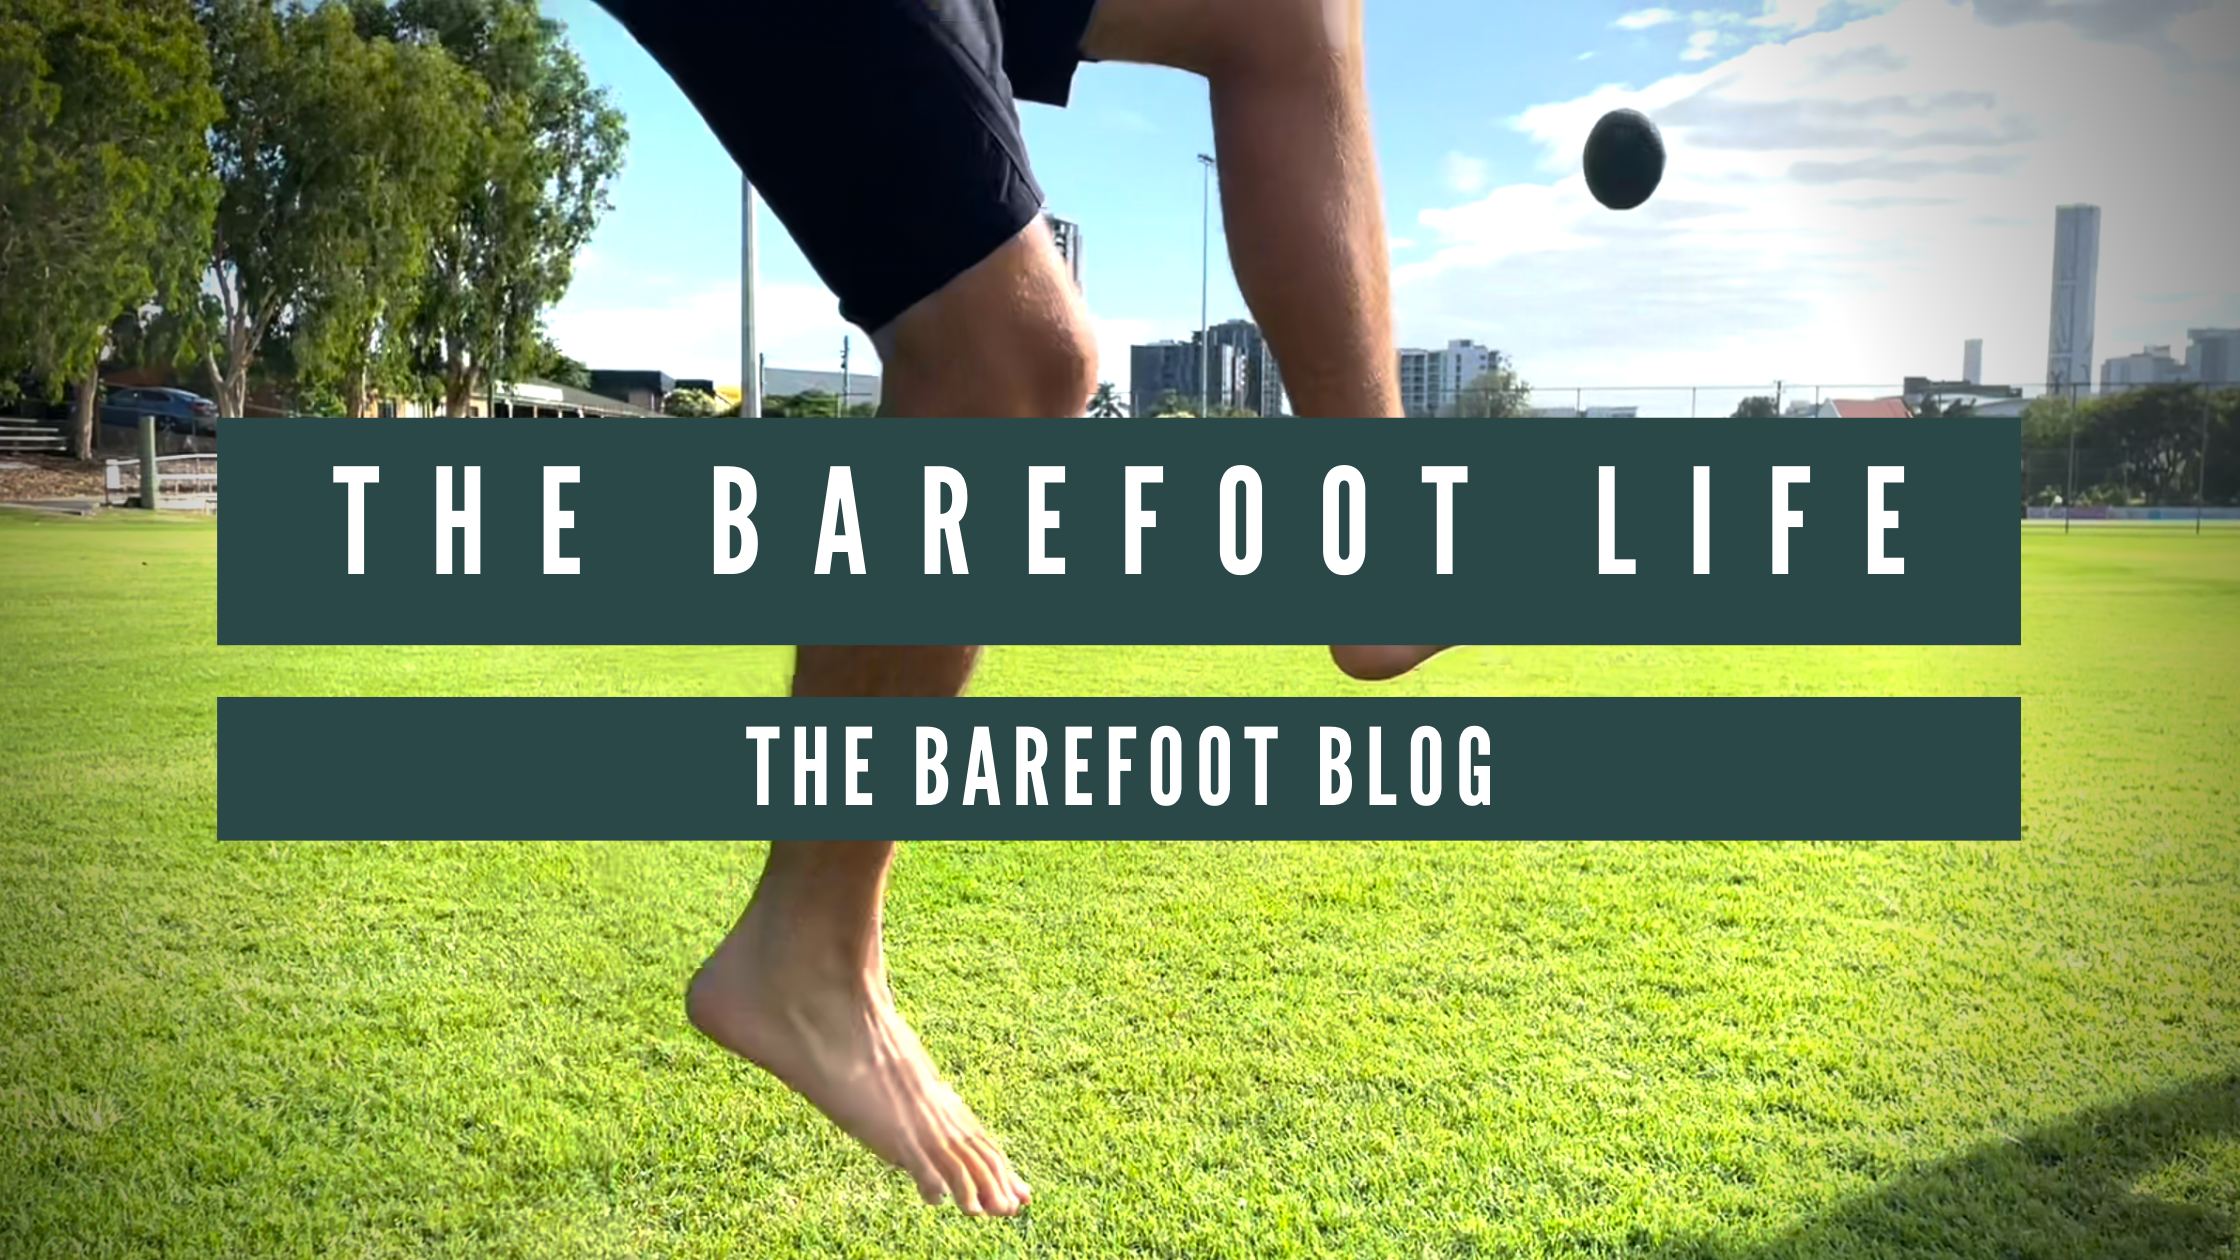 The Barefoot Life